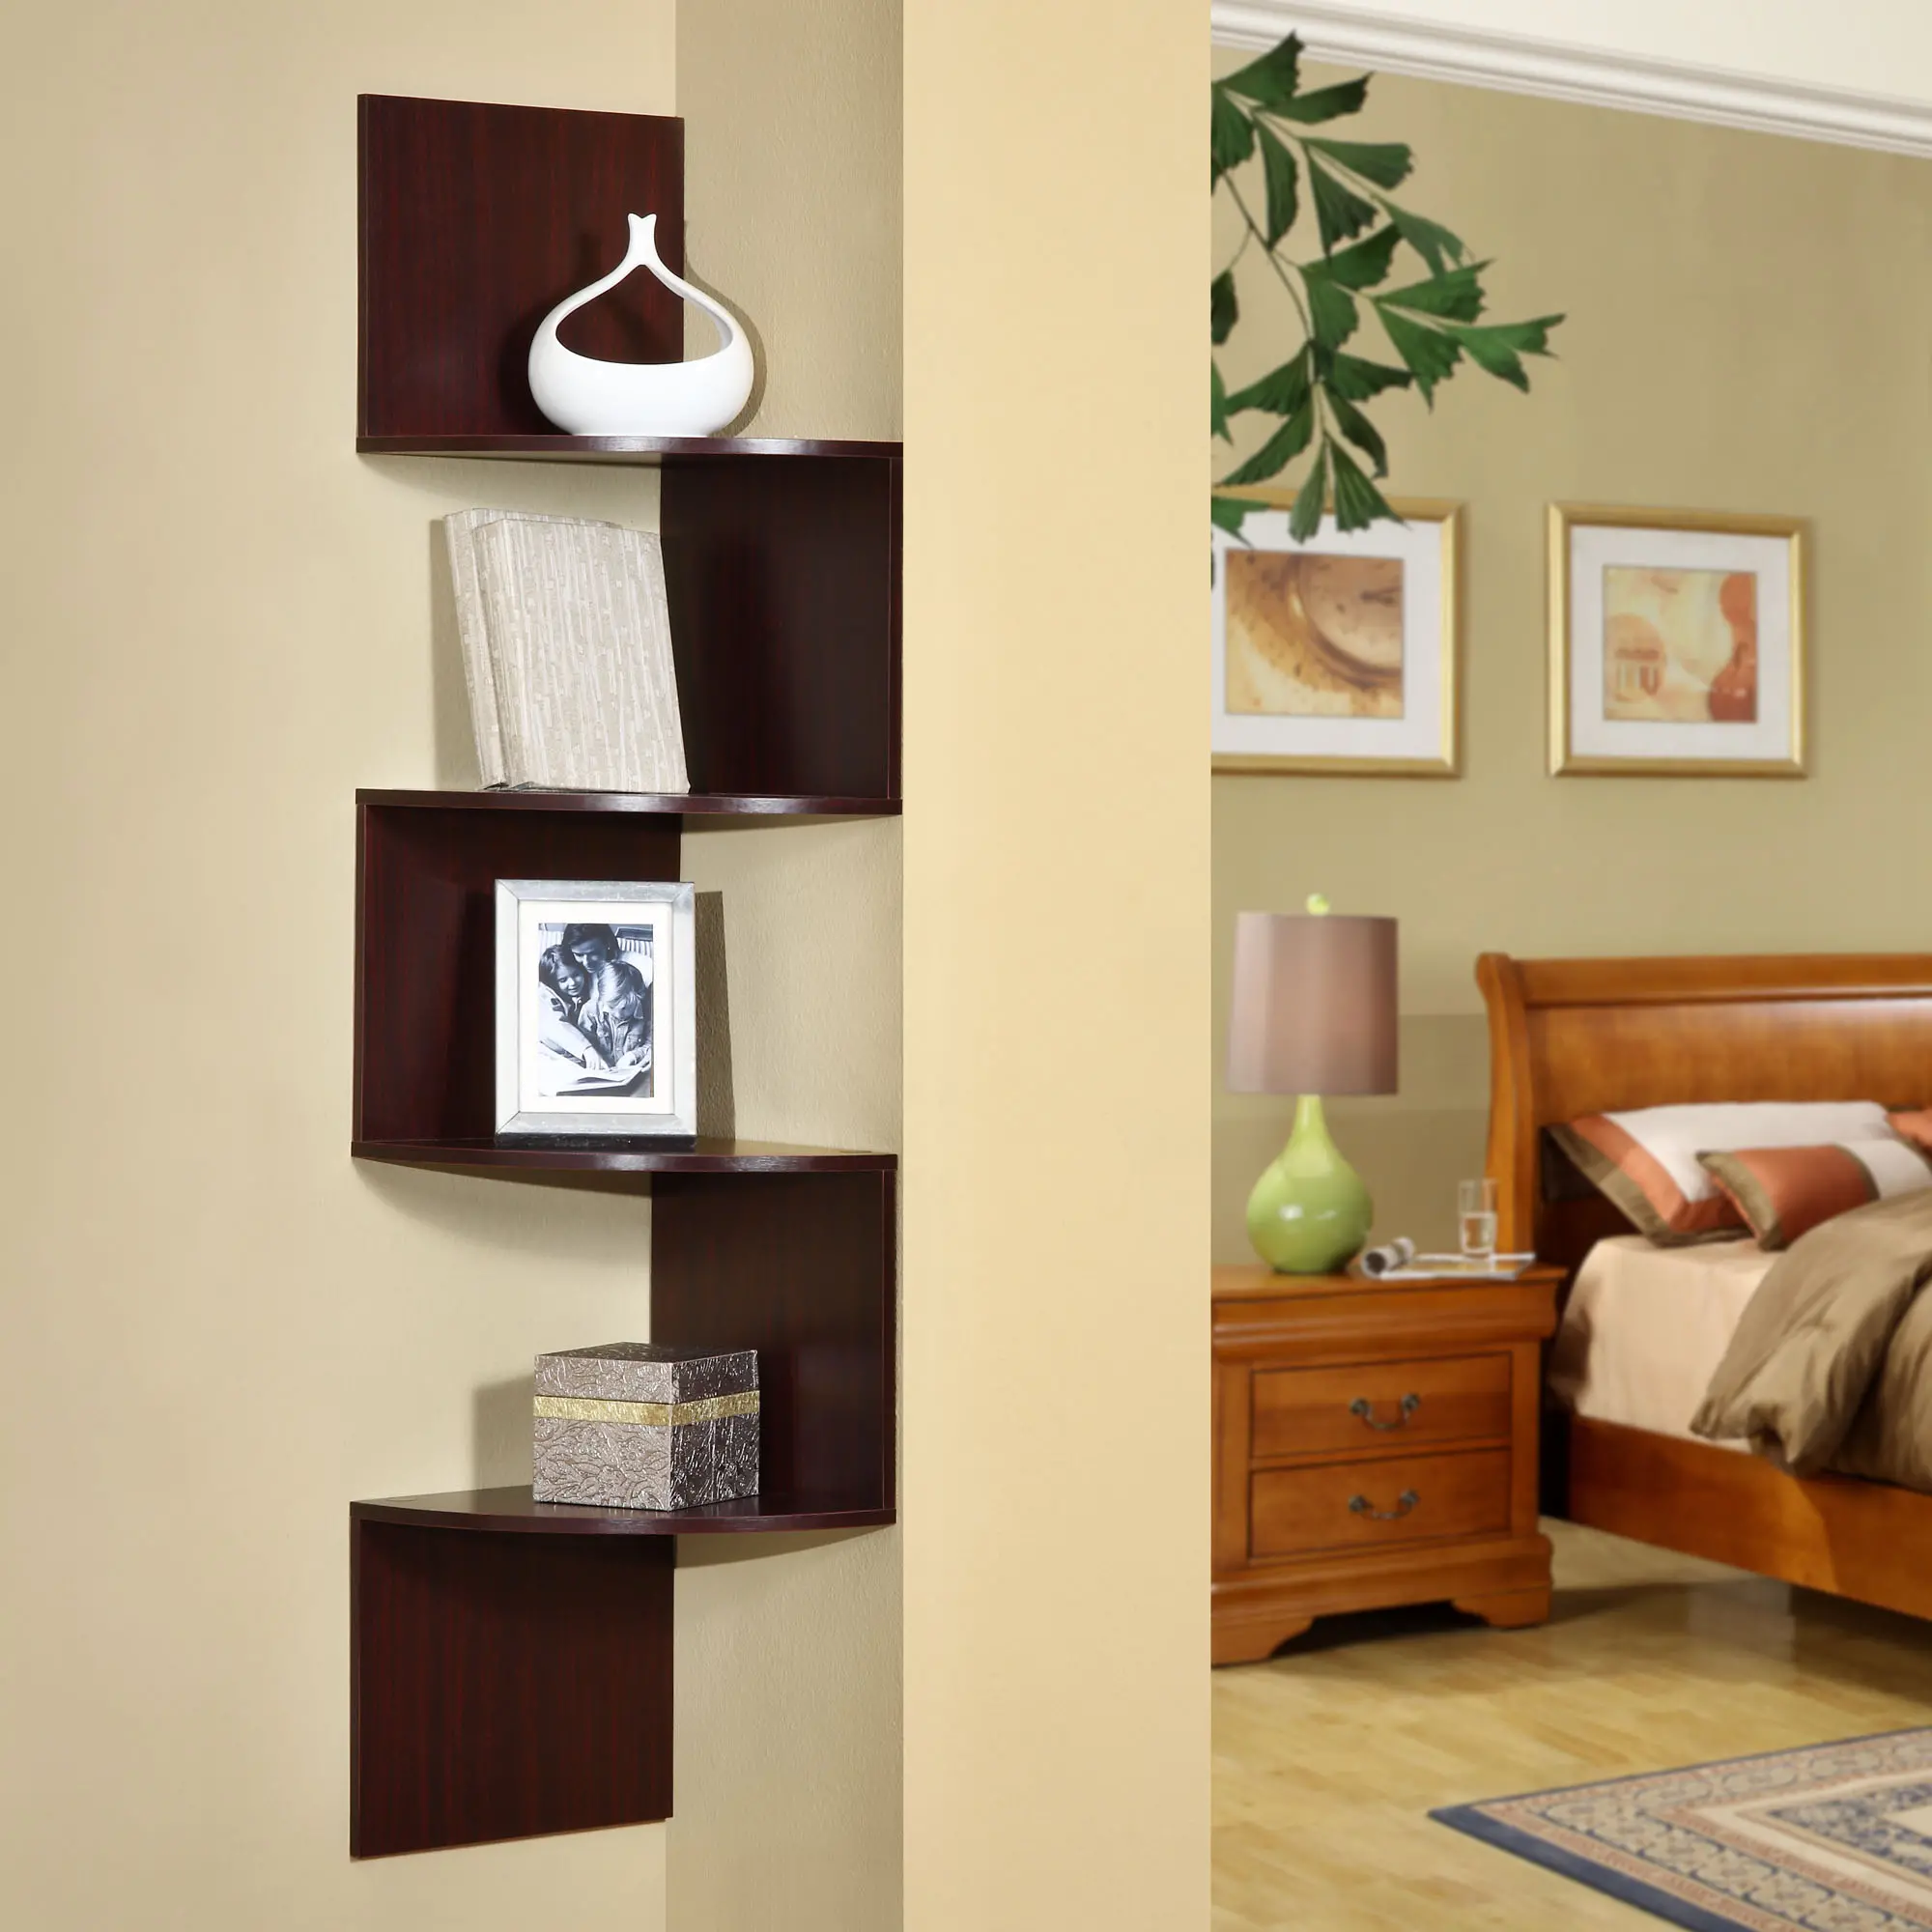 https://static.rcwilley.com/products/111875978/Cherry-Hanging-Corner-Shelving---San-Dimas-rcwilley-image1.webp